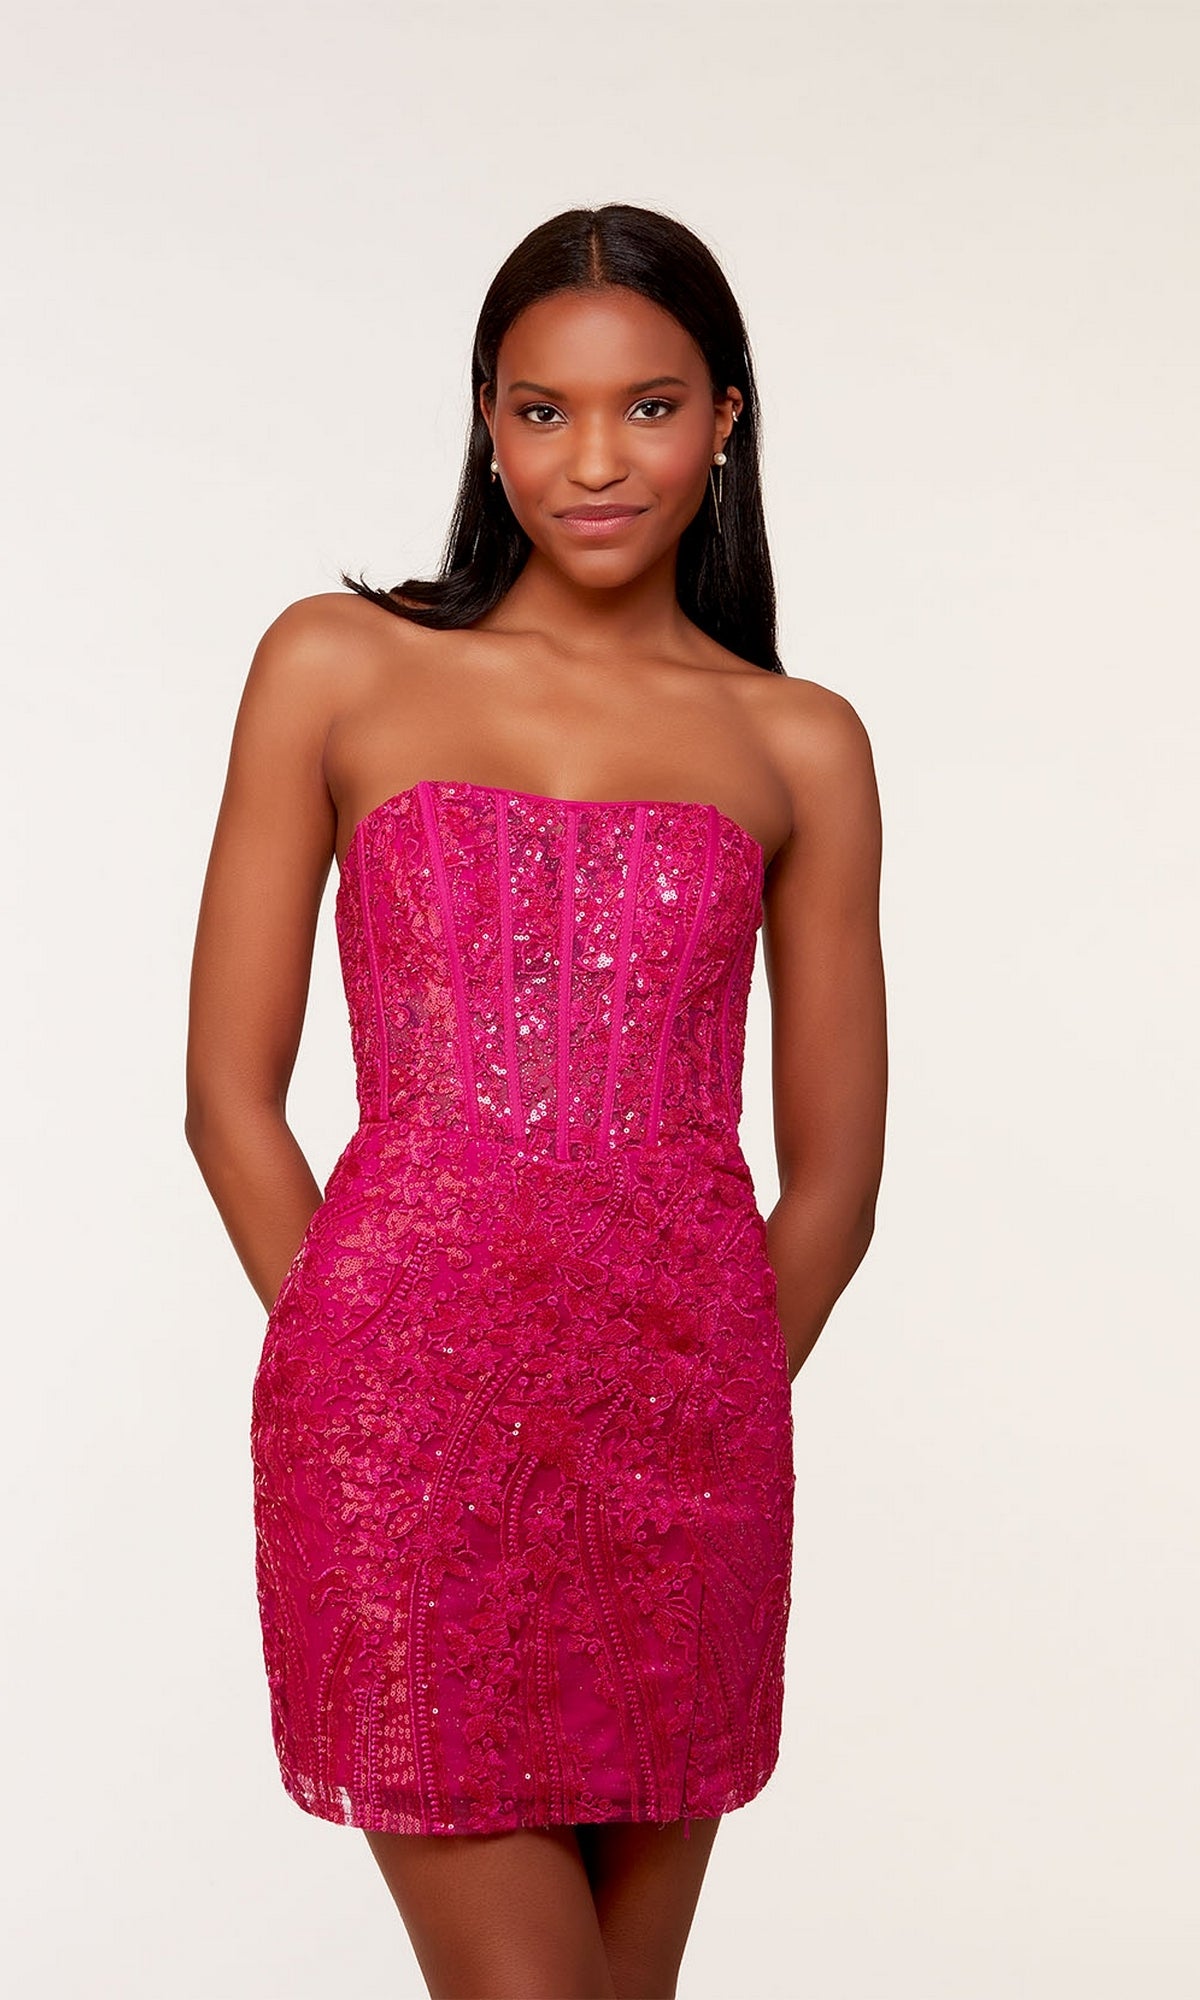 Hot Pink Strapless Short Homecoming Dress with Rhinestones · Sugerdress ·  Online Store Powered by Storenvy